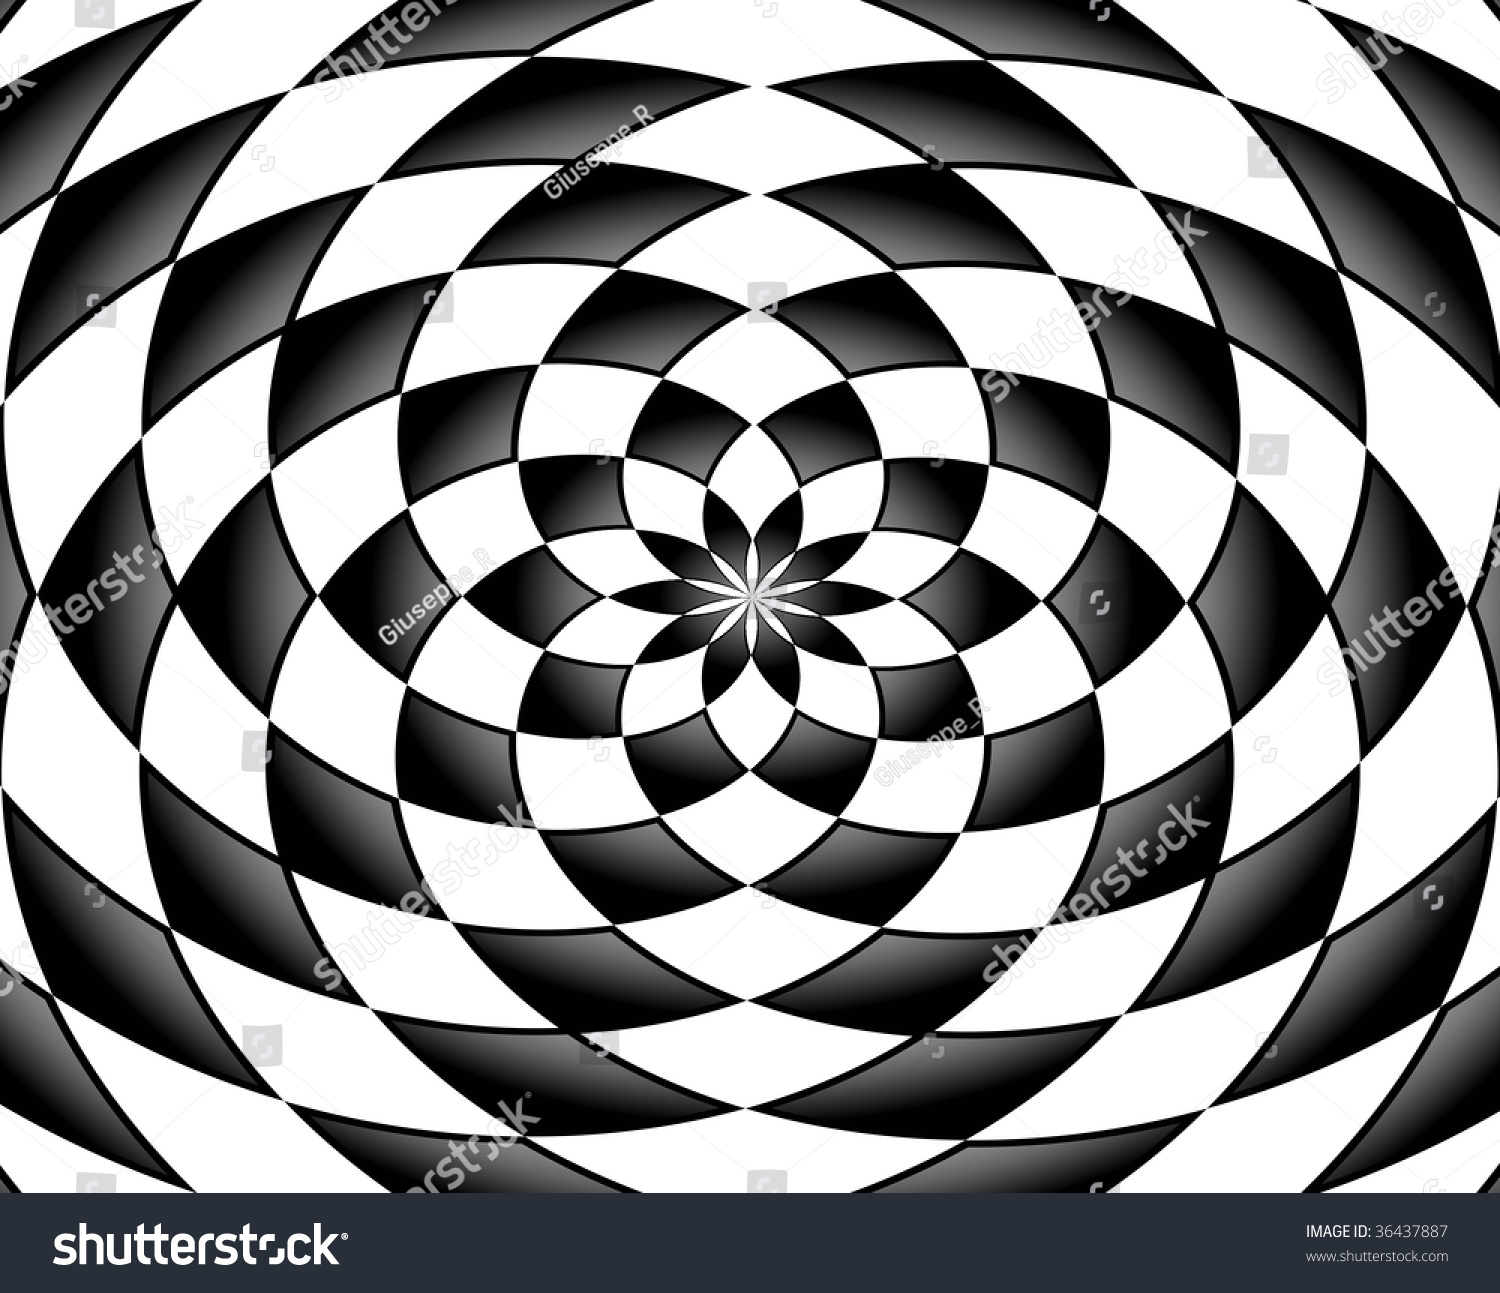 Black White Abstract Shapes Round Effect Stock Illustration 36437887